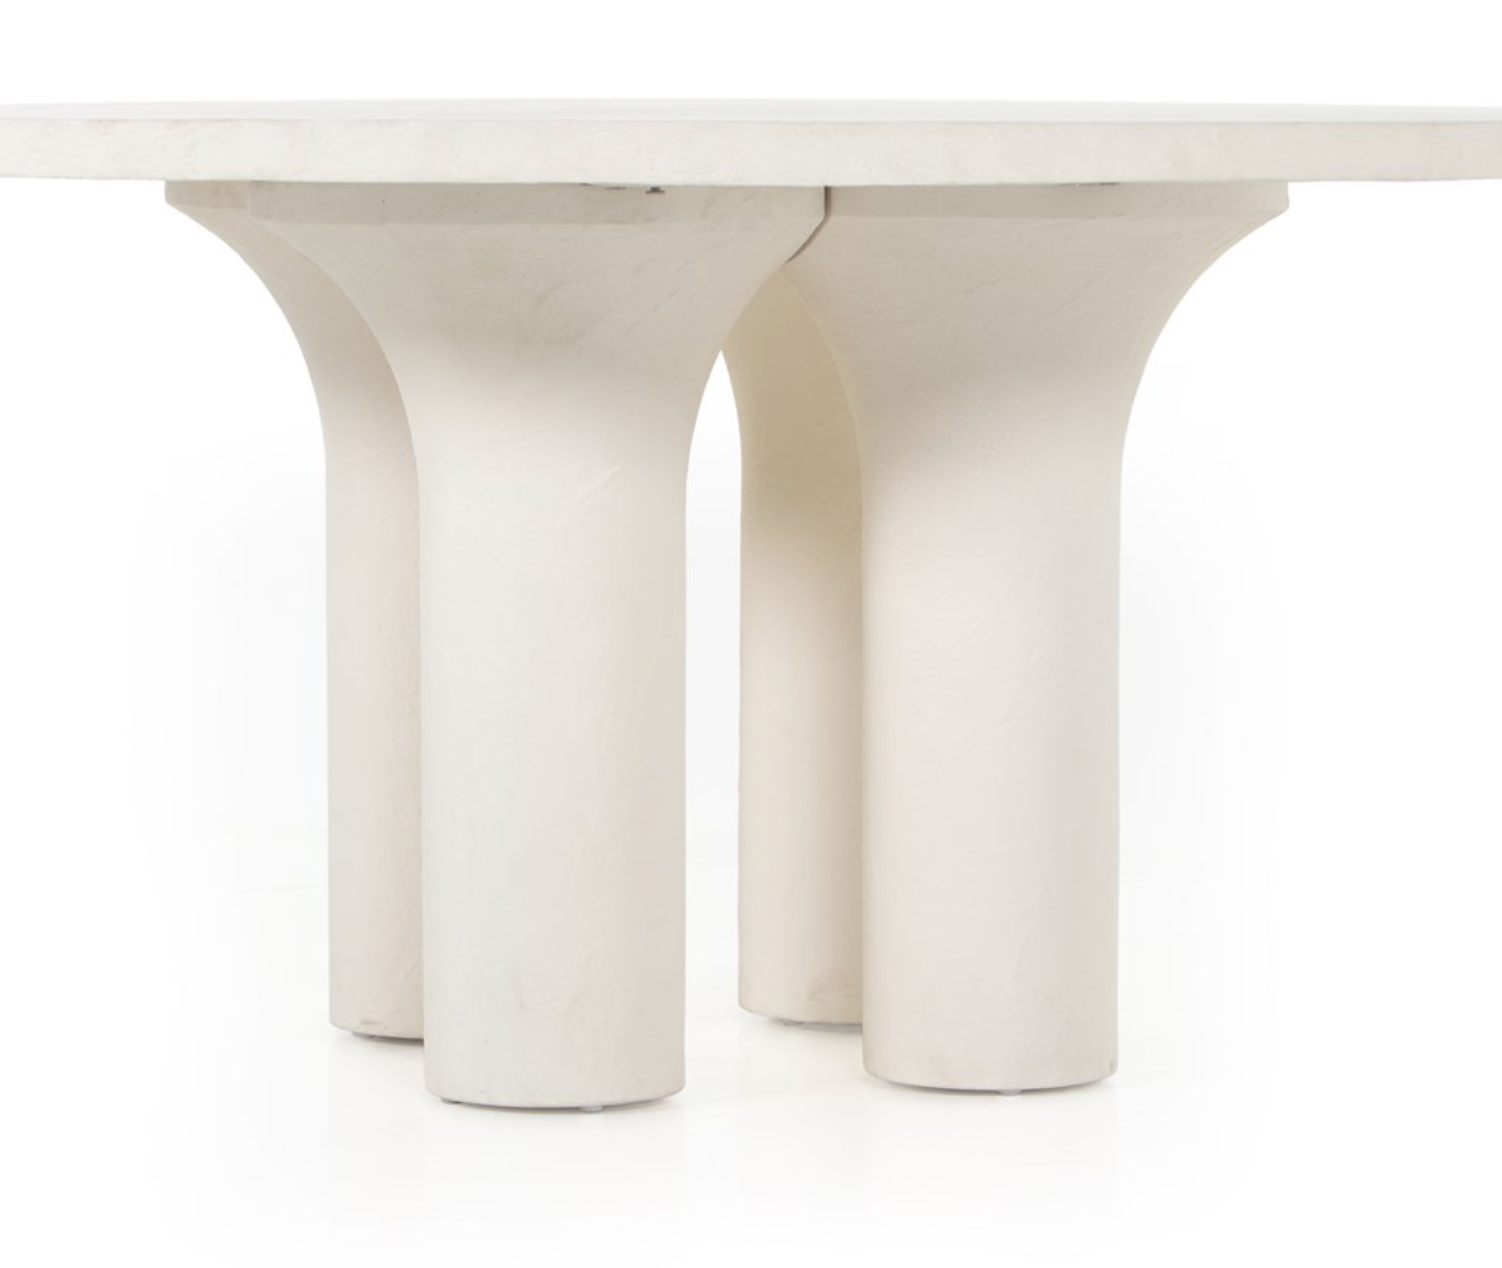 Parra Round Dining Table - Plaster Molded